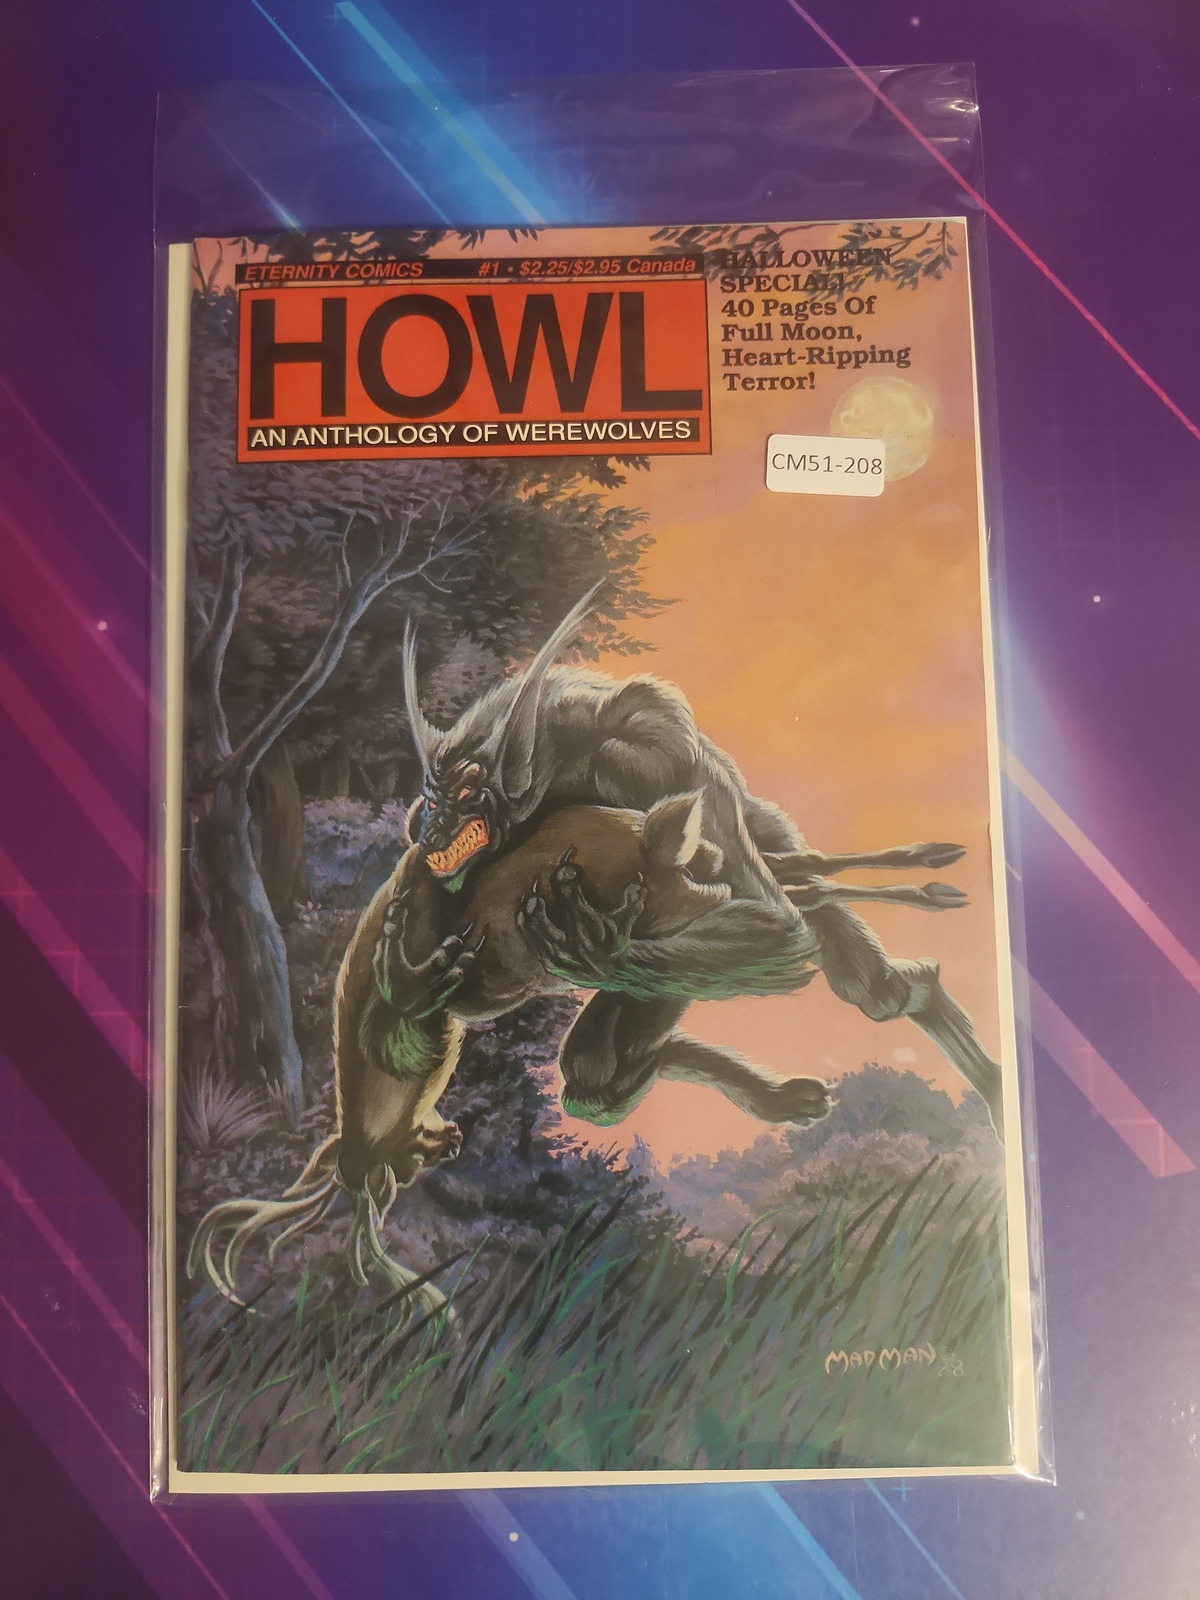 HOWL: AN ANTHOLOGY OF WEREWOLVES #1 ONE-SHOT 8.5 ETERNITY COMIC BOOK CM51-208